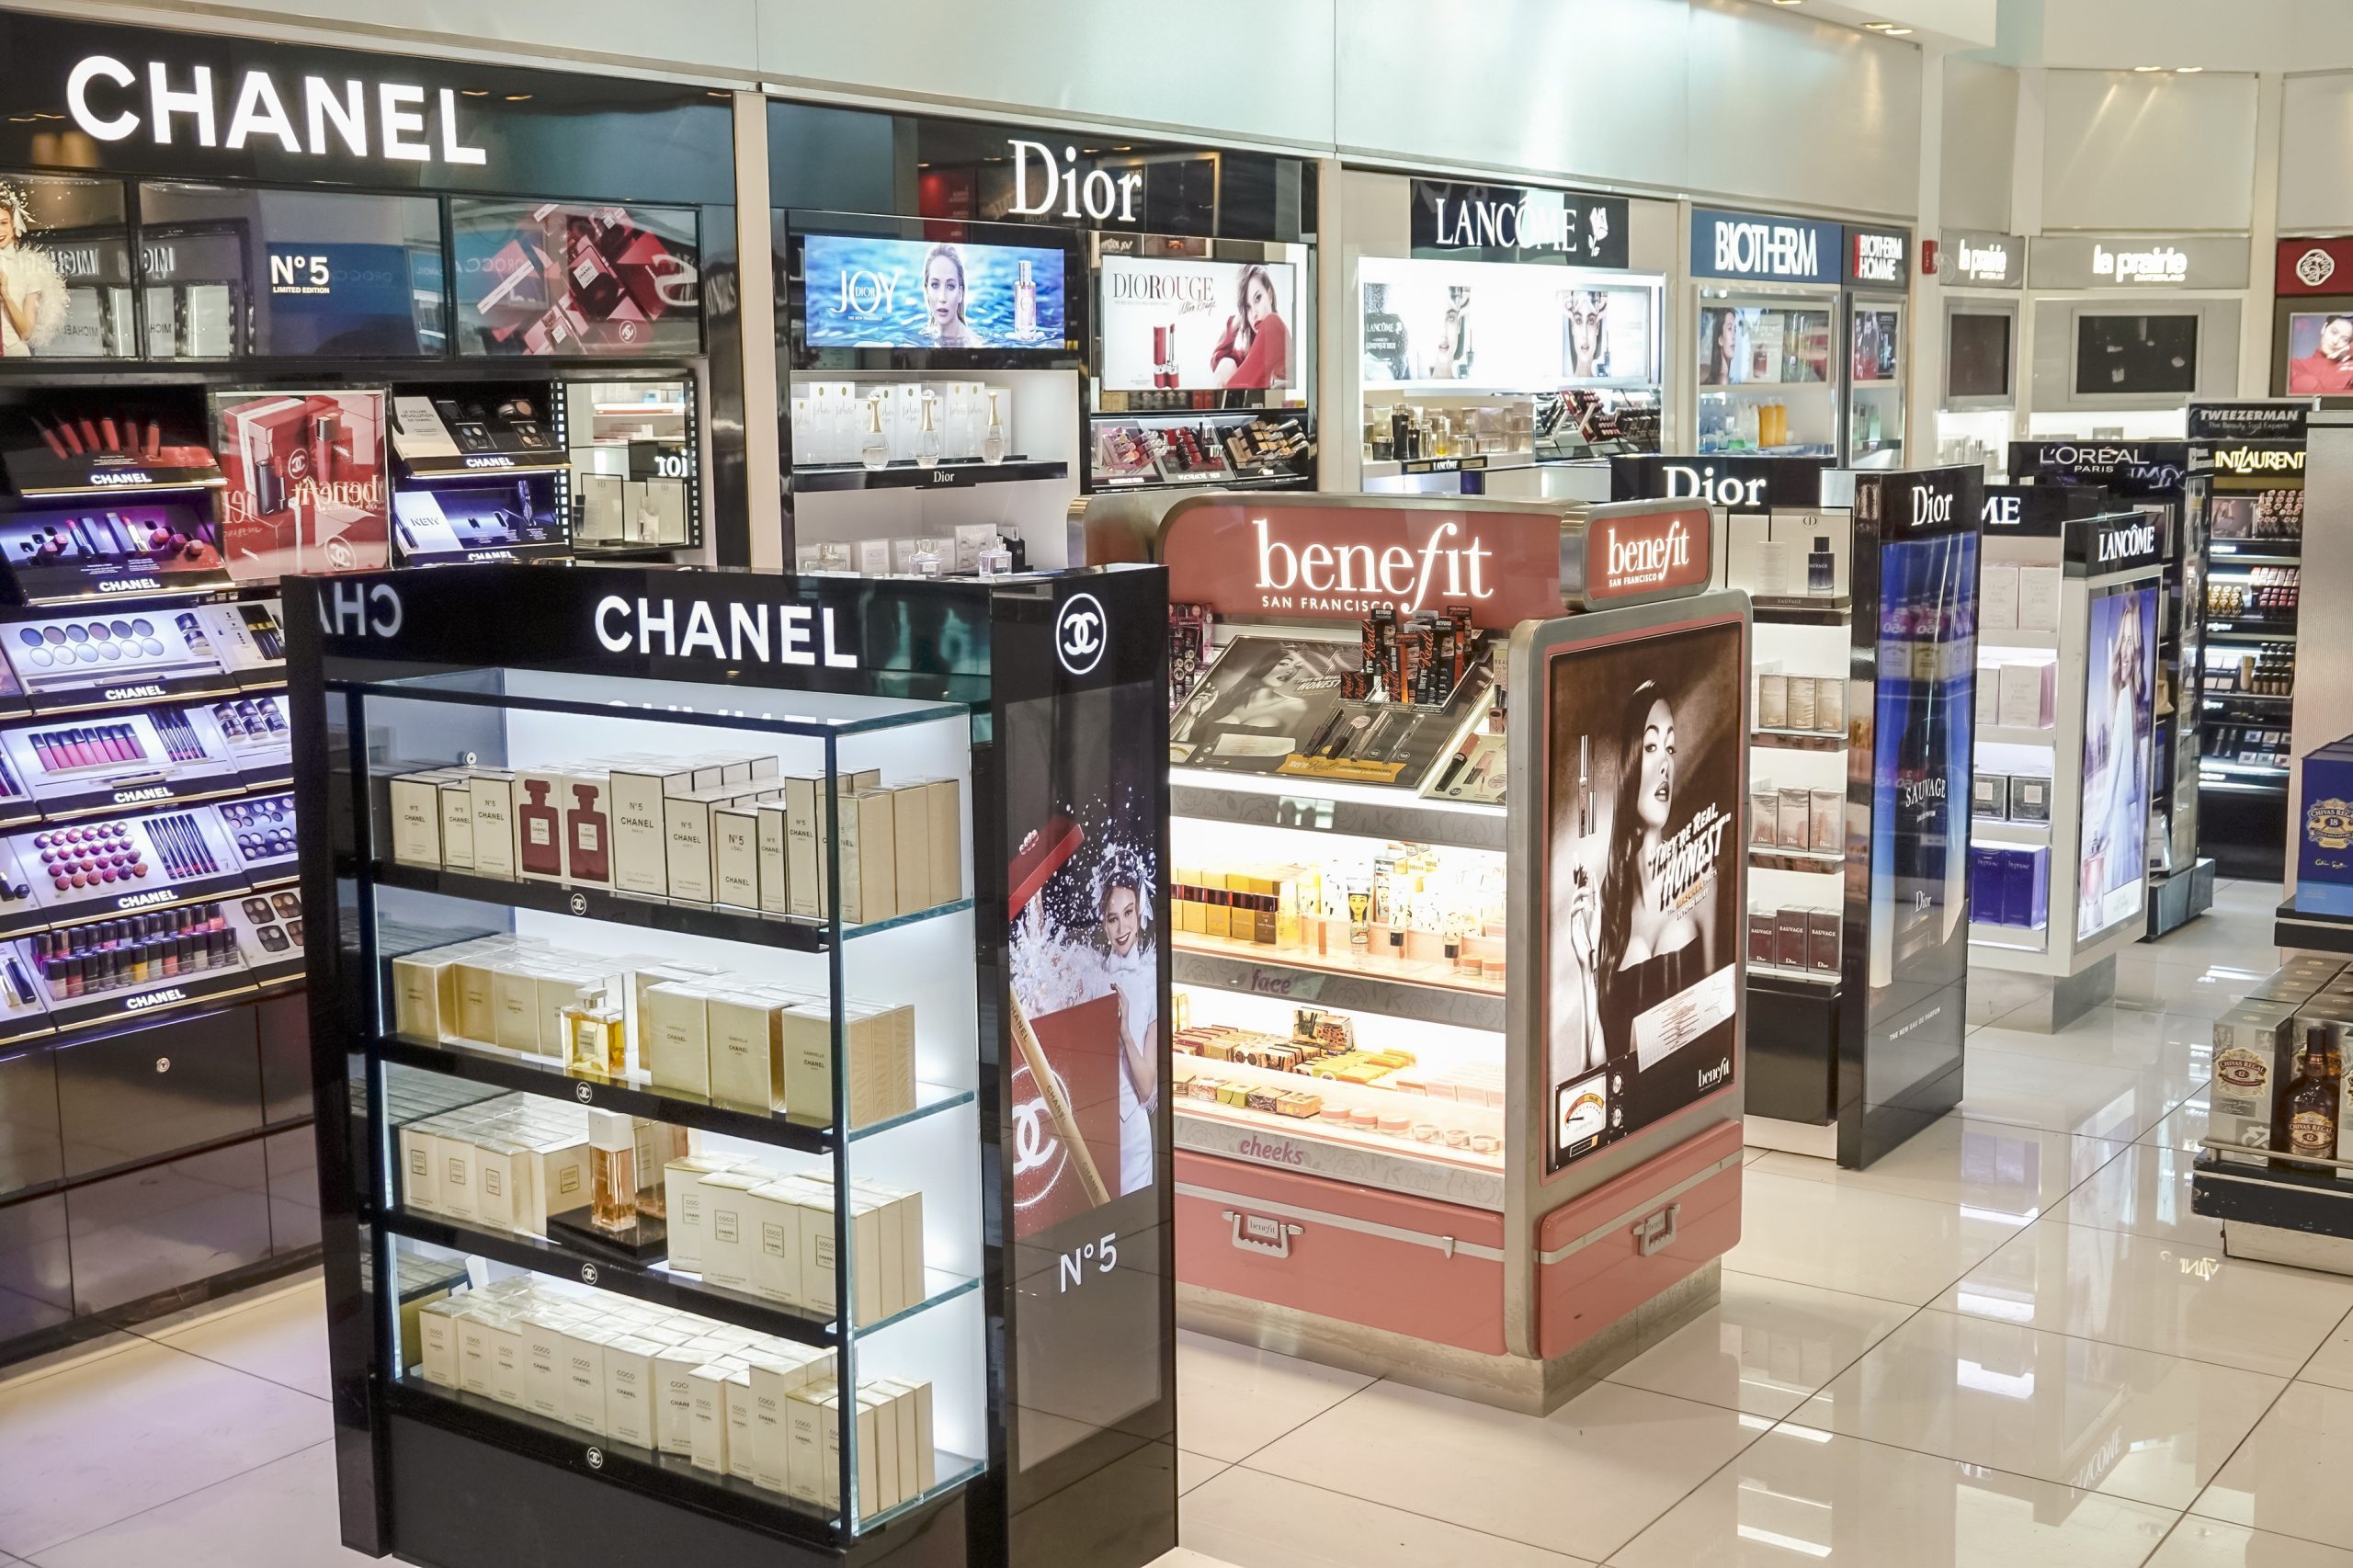 <p>One of the pleasures of buying duty-free at the airport is not only finding good deals but also finding unusual packaging of familiar products. Nadine Heubel, CEO of Heinemann Americas (a company with duty-free shops in 74 airports across 28 countries), suggests travelers seek out:</p> <ul> <li class="">Larger than usual, duty-free-exclusive versions of products</li> <li class="">Unique packaging that you have never seen sold at a store near home</li> <li class="">Travel exclusives of popular brands</li> </ul> <p>It's okay if you forget to shop duty-free during your international trip, but these are the <a href="https://www.rd.com/list/things-never-to-forget-when-traveling-overseas/">16 things you should never forget when traveling overseas</a>.</p>